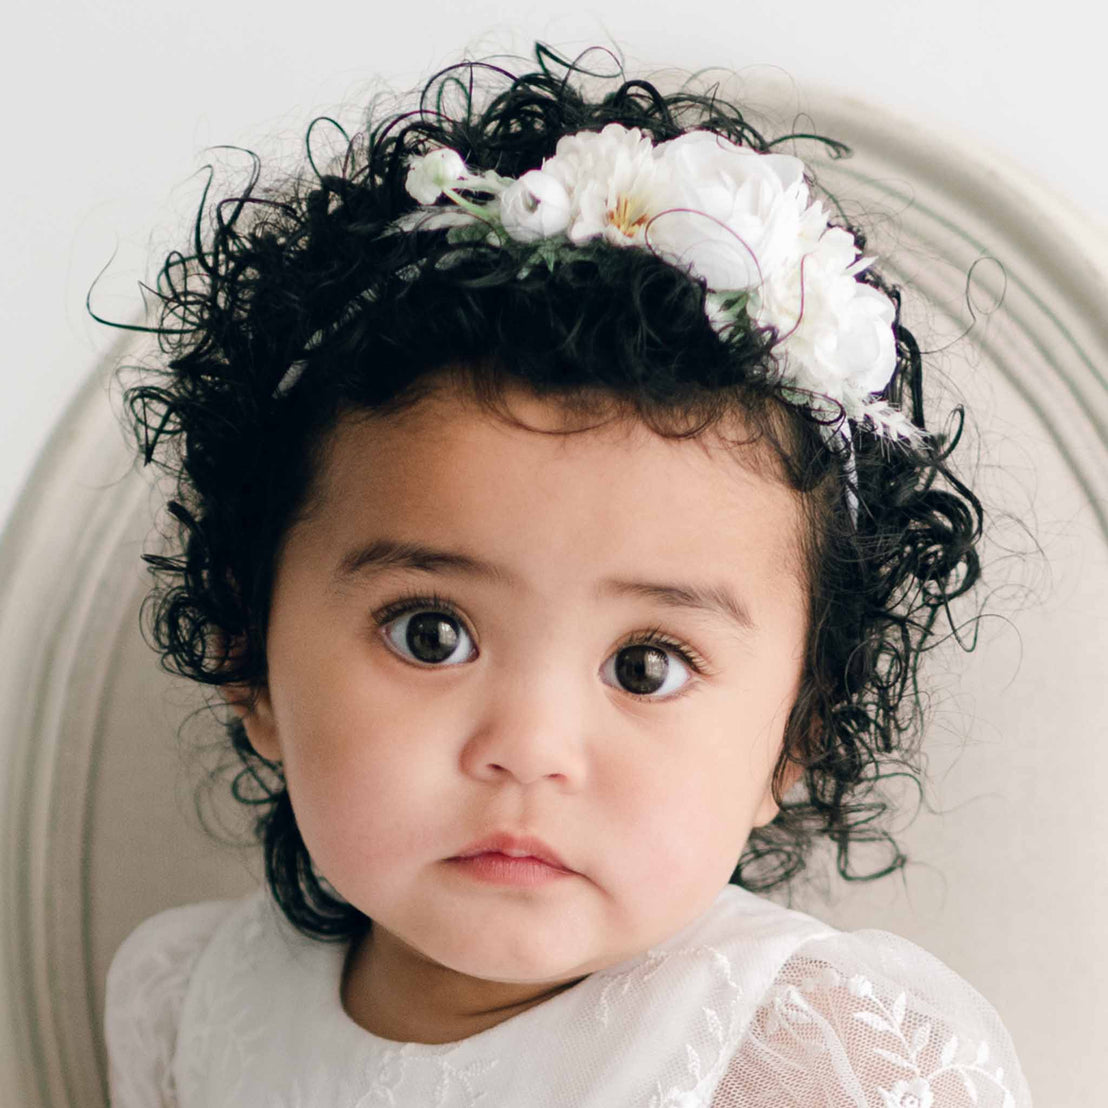 A toddler with curly black hair, adorned with an Ella Flower Headband, is seated on a beige chair. The child is wearing a white lace dress and has a neutral expression while looking directly at the camera amid the backdrop of white flowers and greenery.